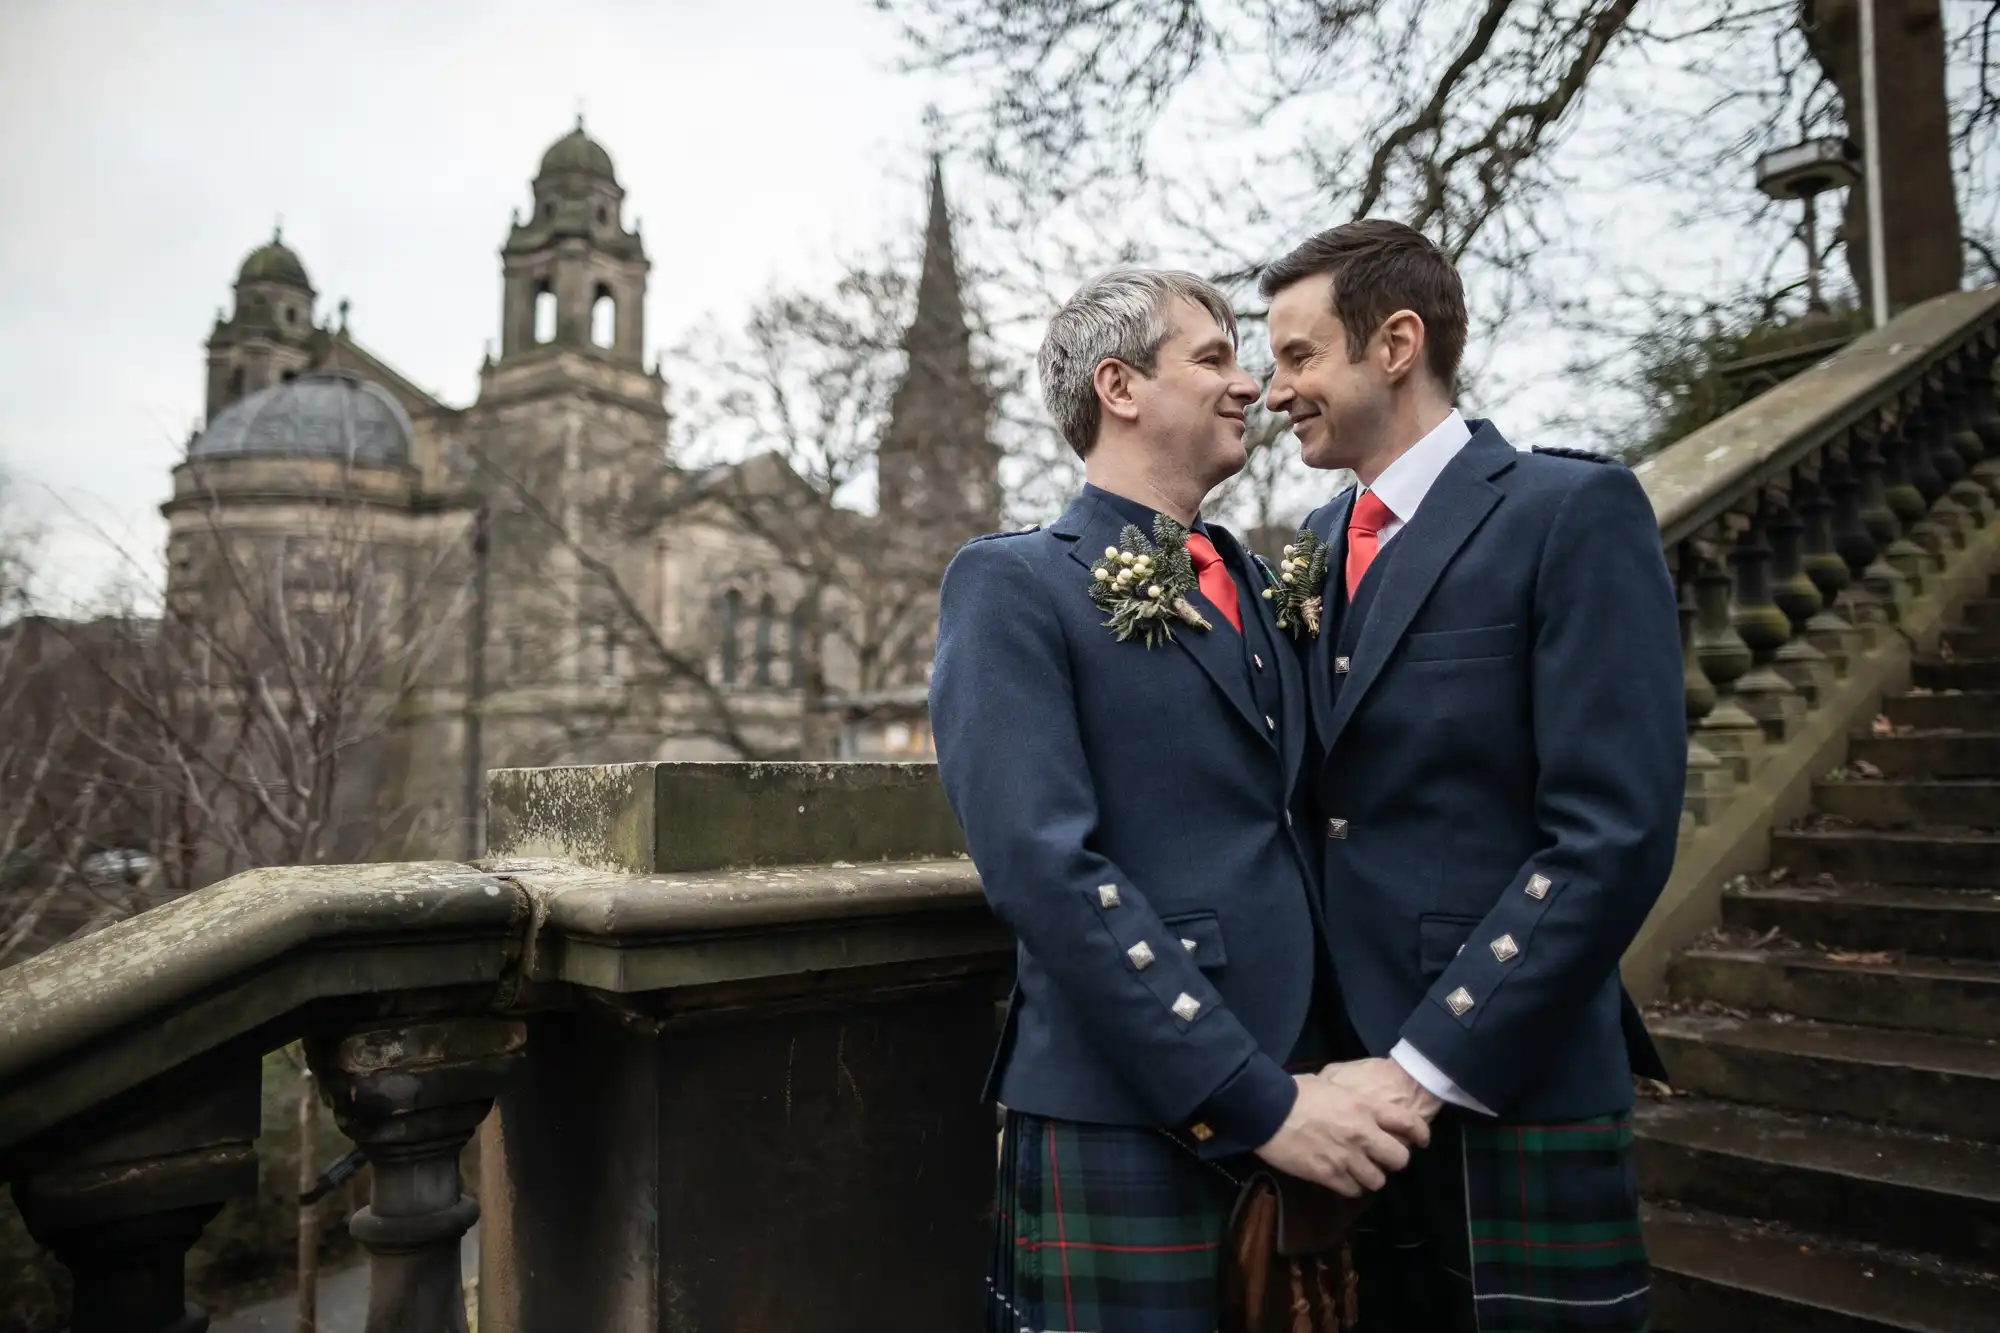 Two men in matching formal attire hold hands and gaze at each other lovingly on an outdoor staircase, with historical architecture and bare trees in the background.